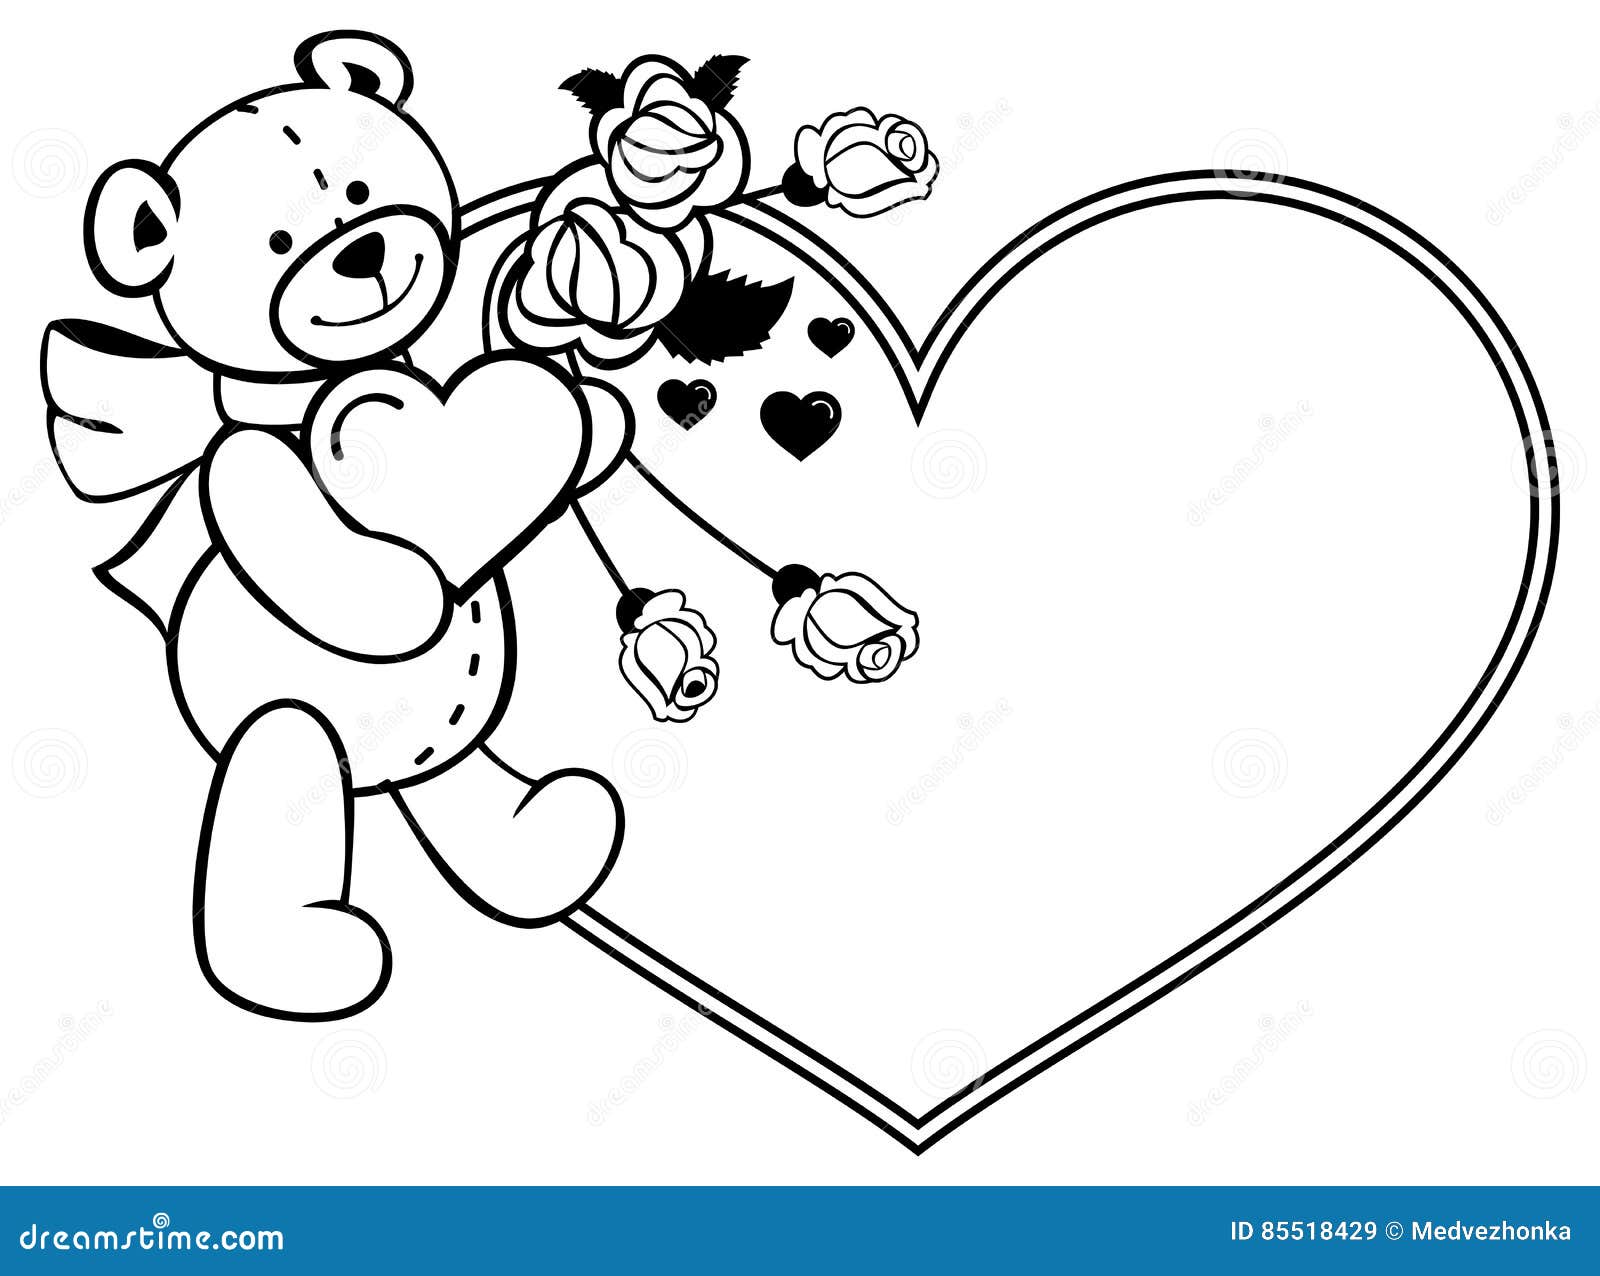 Heart Shaped Frame With Outline Roses Teddy Bear Holding Heart